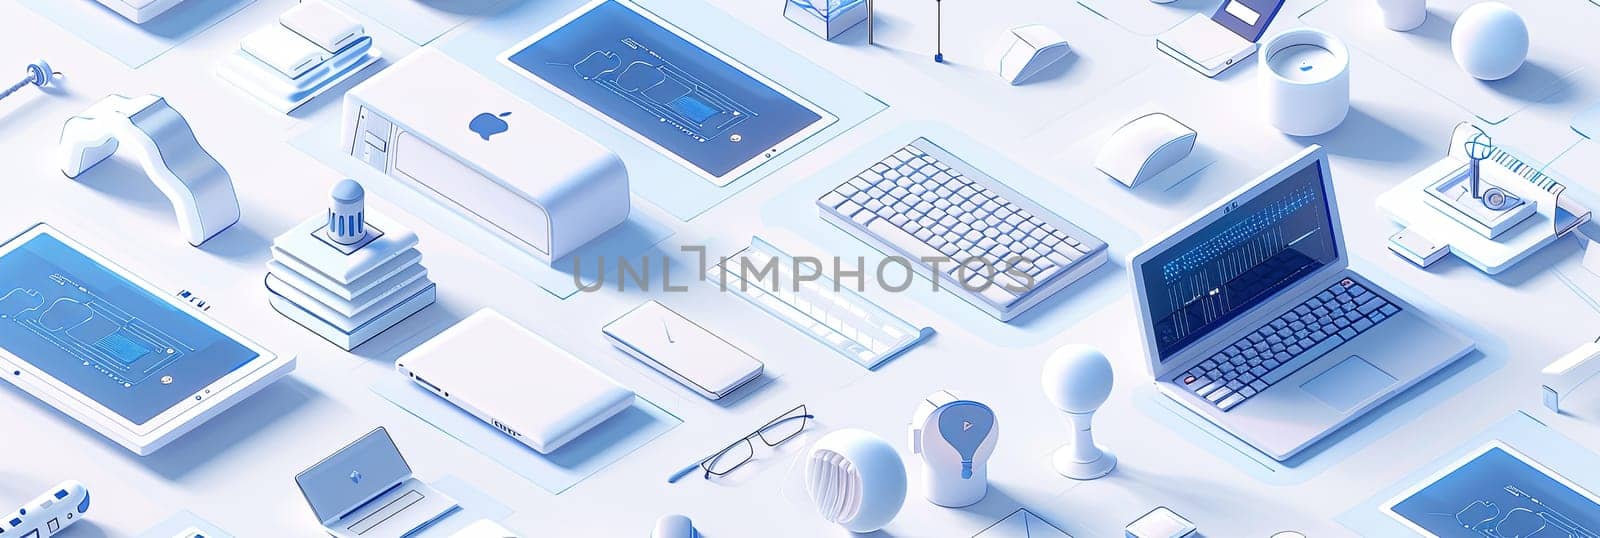 Various types of laptops are displayed on a table in a neat arrangement. The image features a mix of technology equipment against a white and blue backdrop.